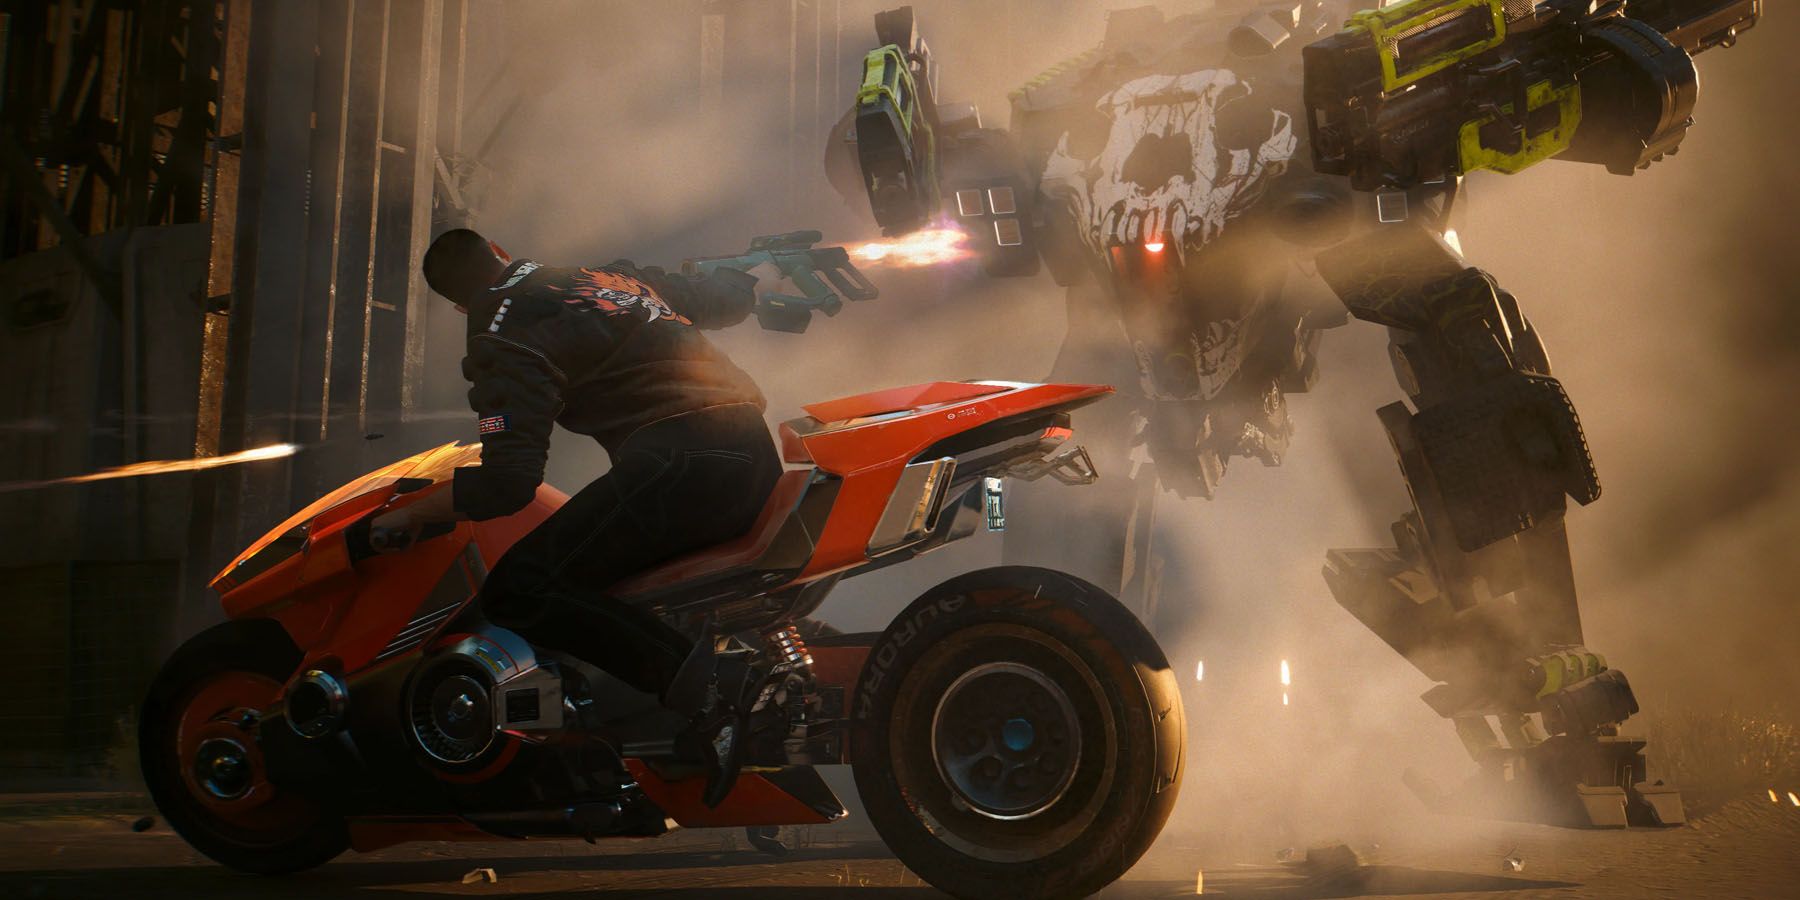 A screenshot of V shooting at a mech on top of a motorcycle in Cyberpunk 2077: Phantom Liberty.